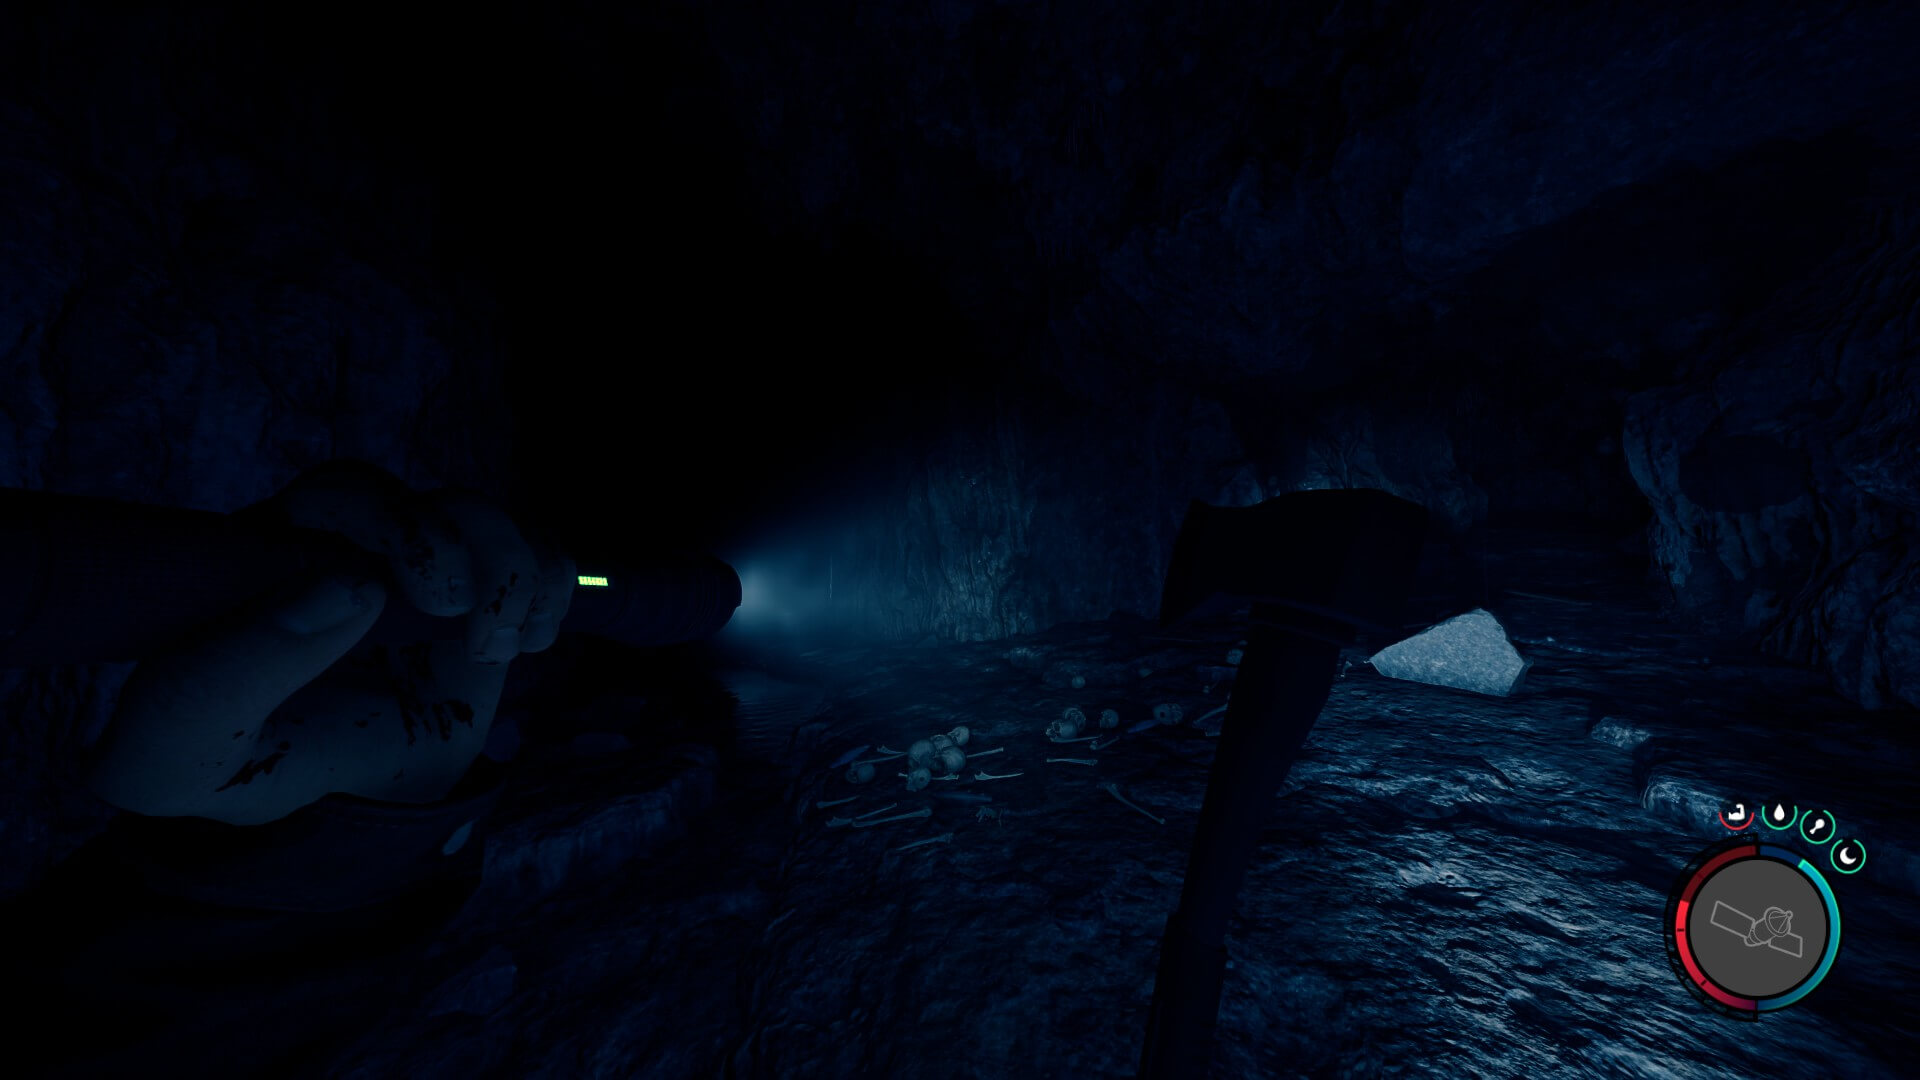 Sons of the Forest screenshot showing a cave with two paths, with the player holding a flashlight.